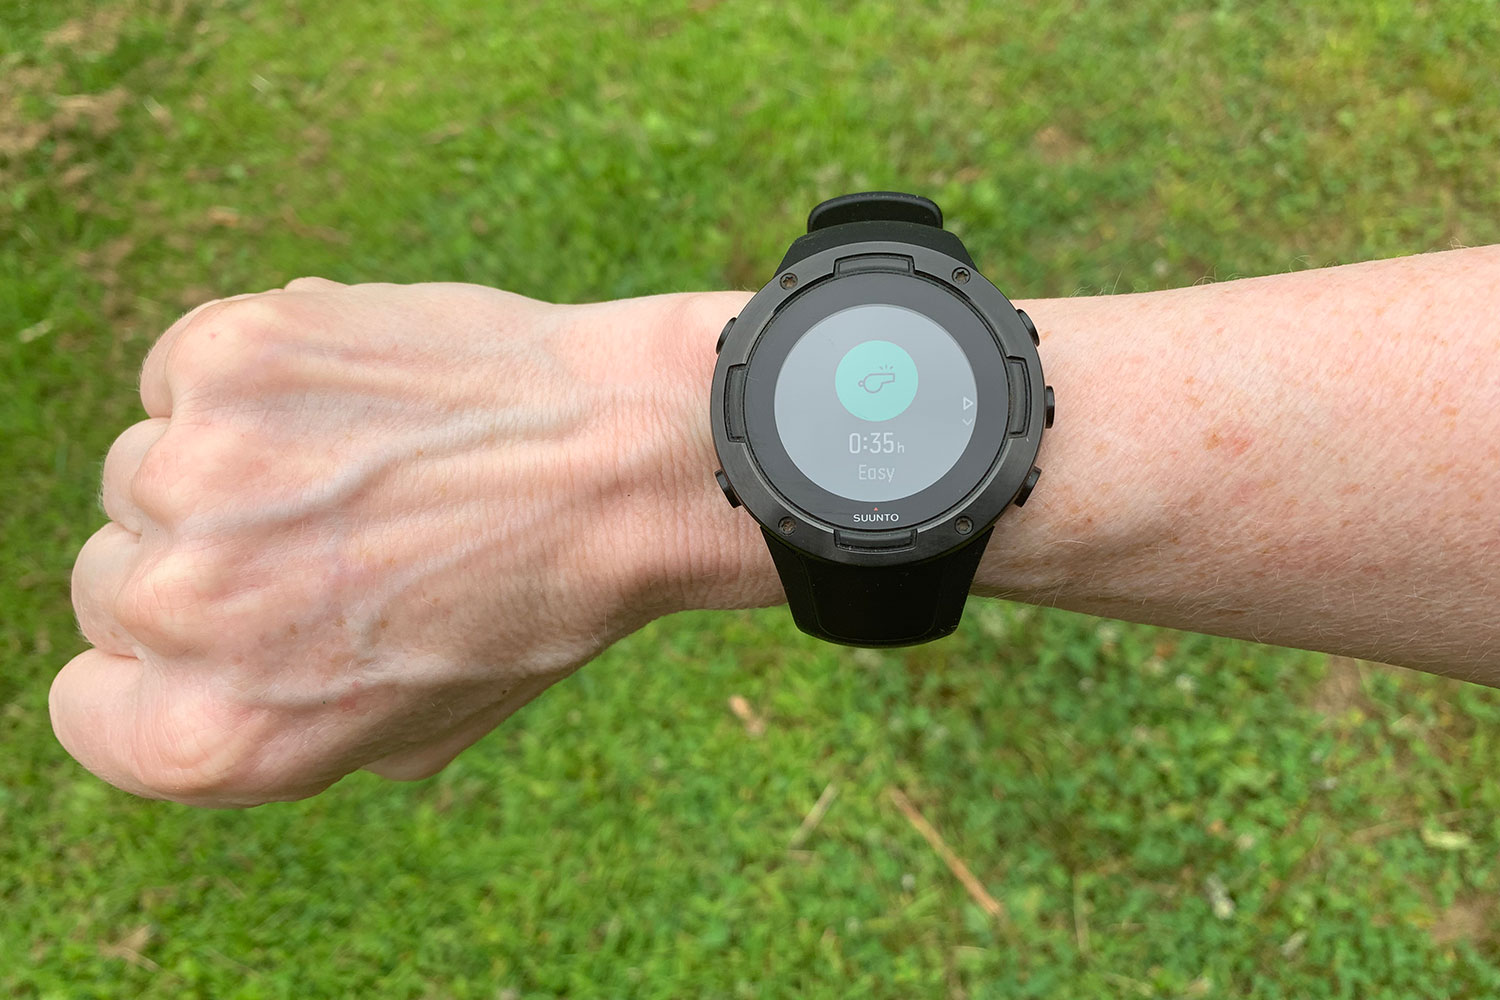 Suunto 5 Sports Watch Review: The Display Can't Keep Up The Pace